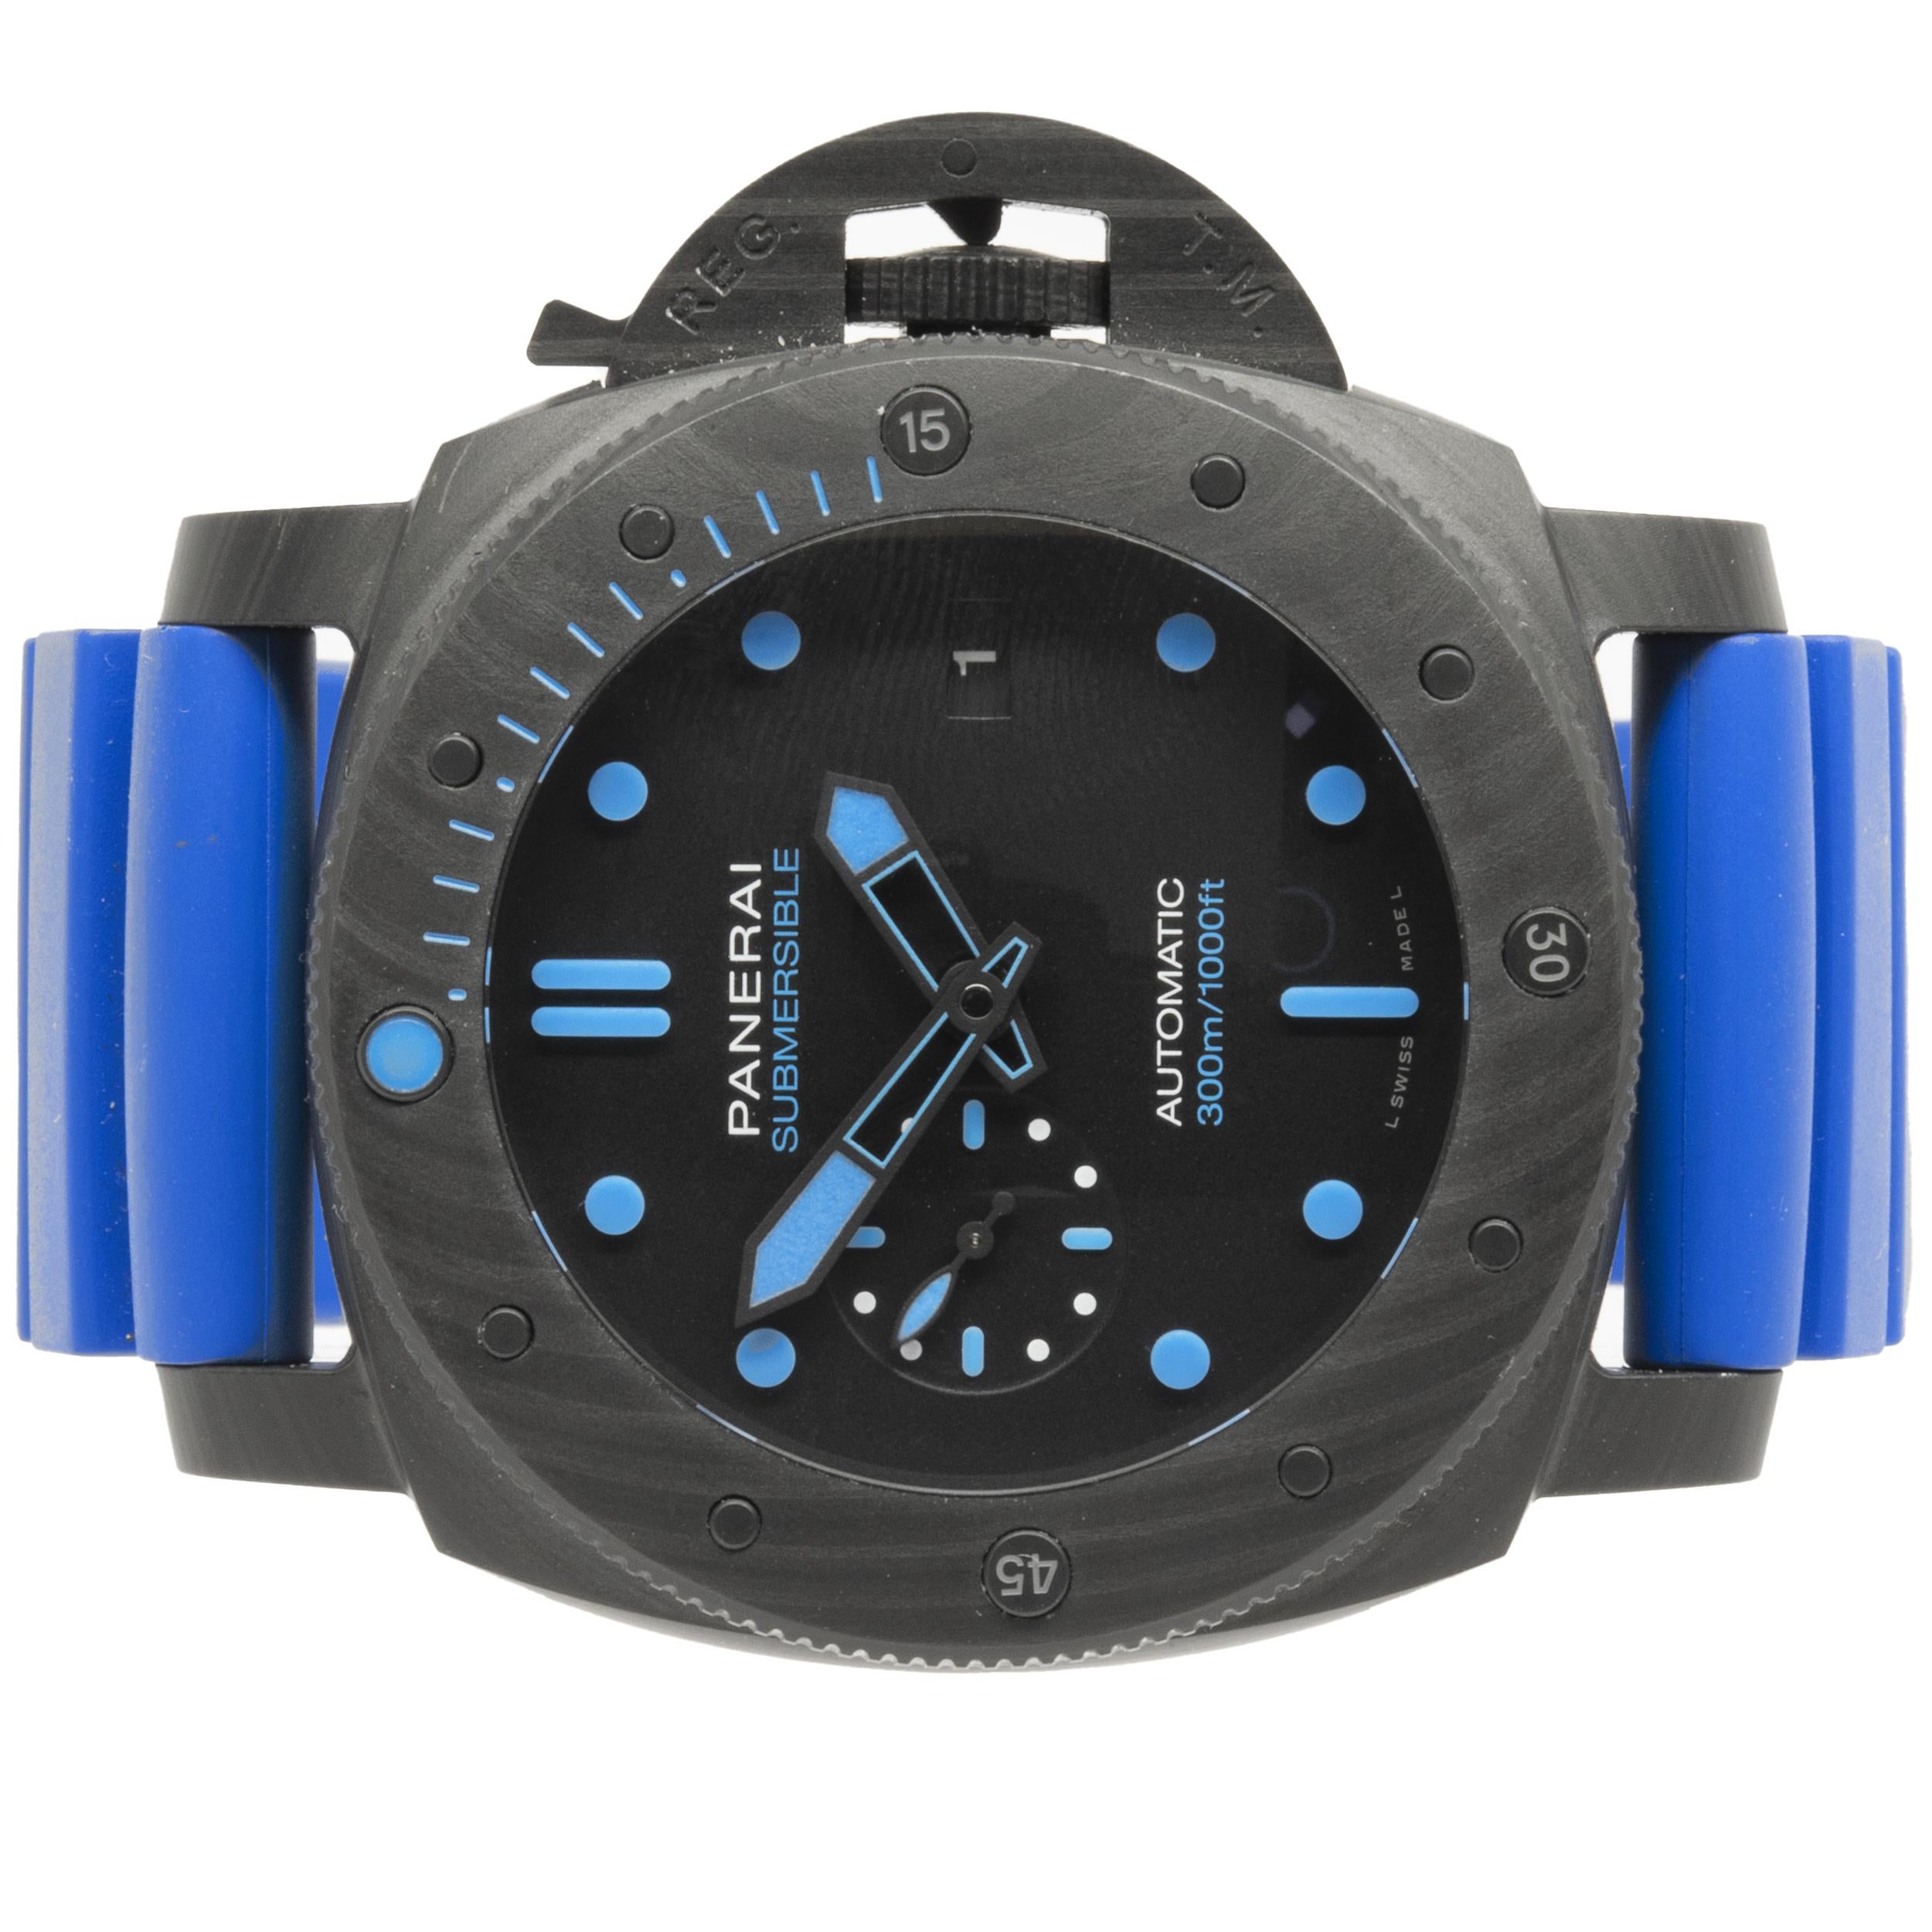 Movement: automatic
Function: hour, minute, small seconds, date,
Case: 44mm stainless steel case, sapphire crystal, uni-directional 60 minute timing bezel, push-pull crown
Band: Panerai blue rubber strap, tang buckle
Dial: black dial, blue dot